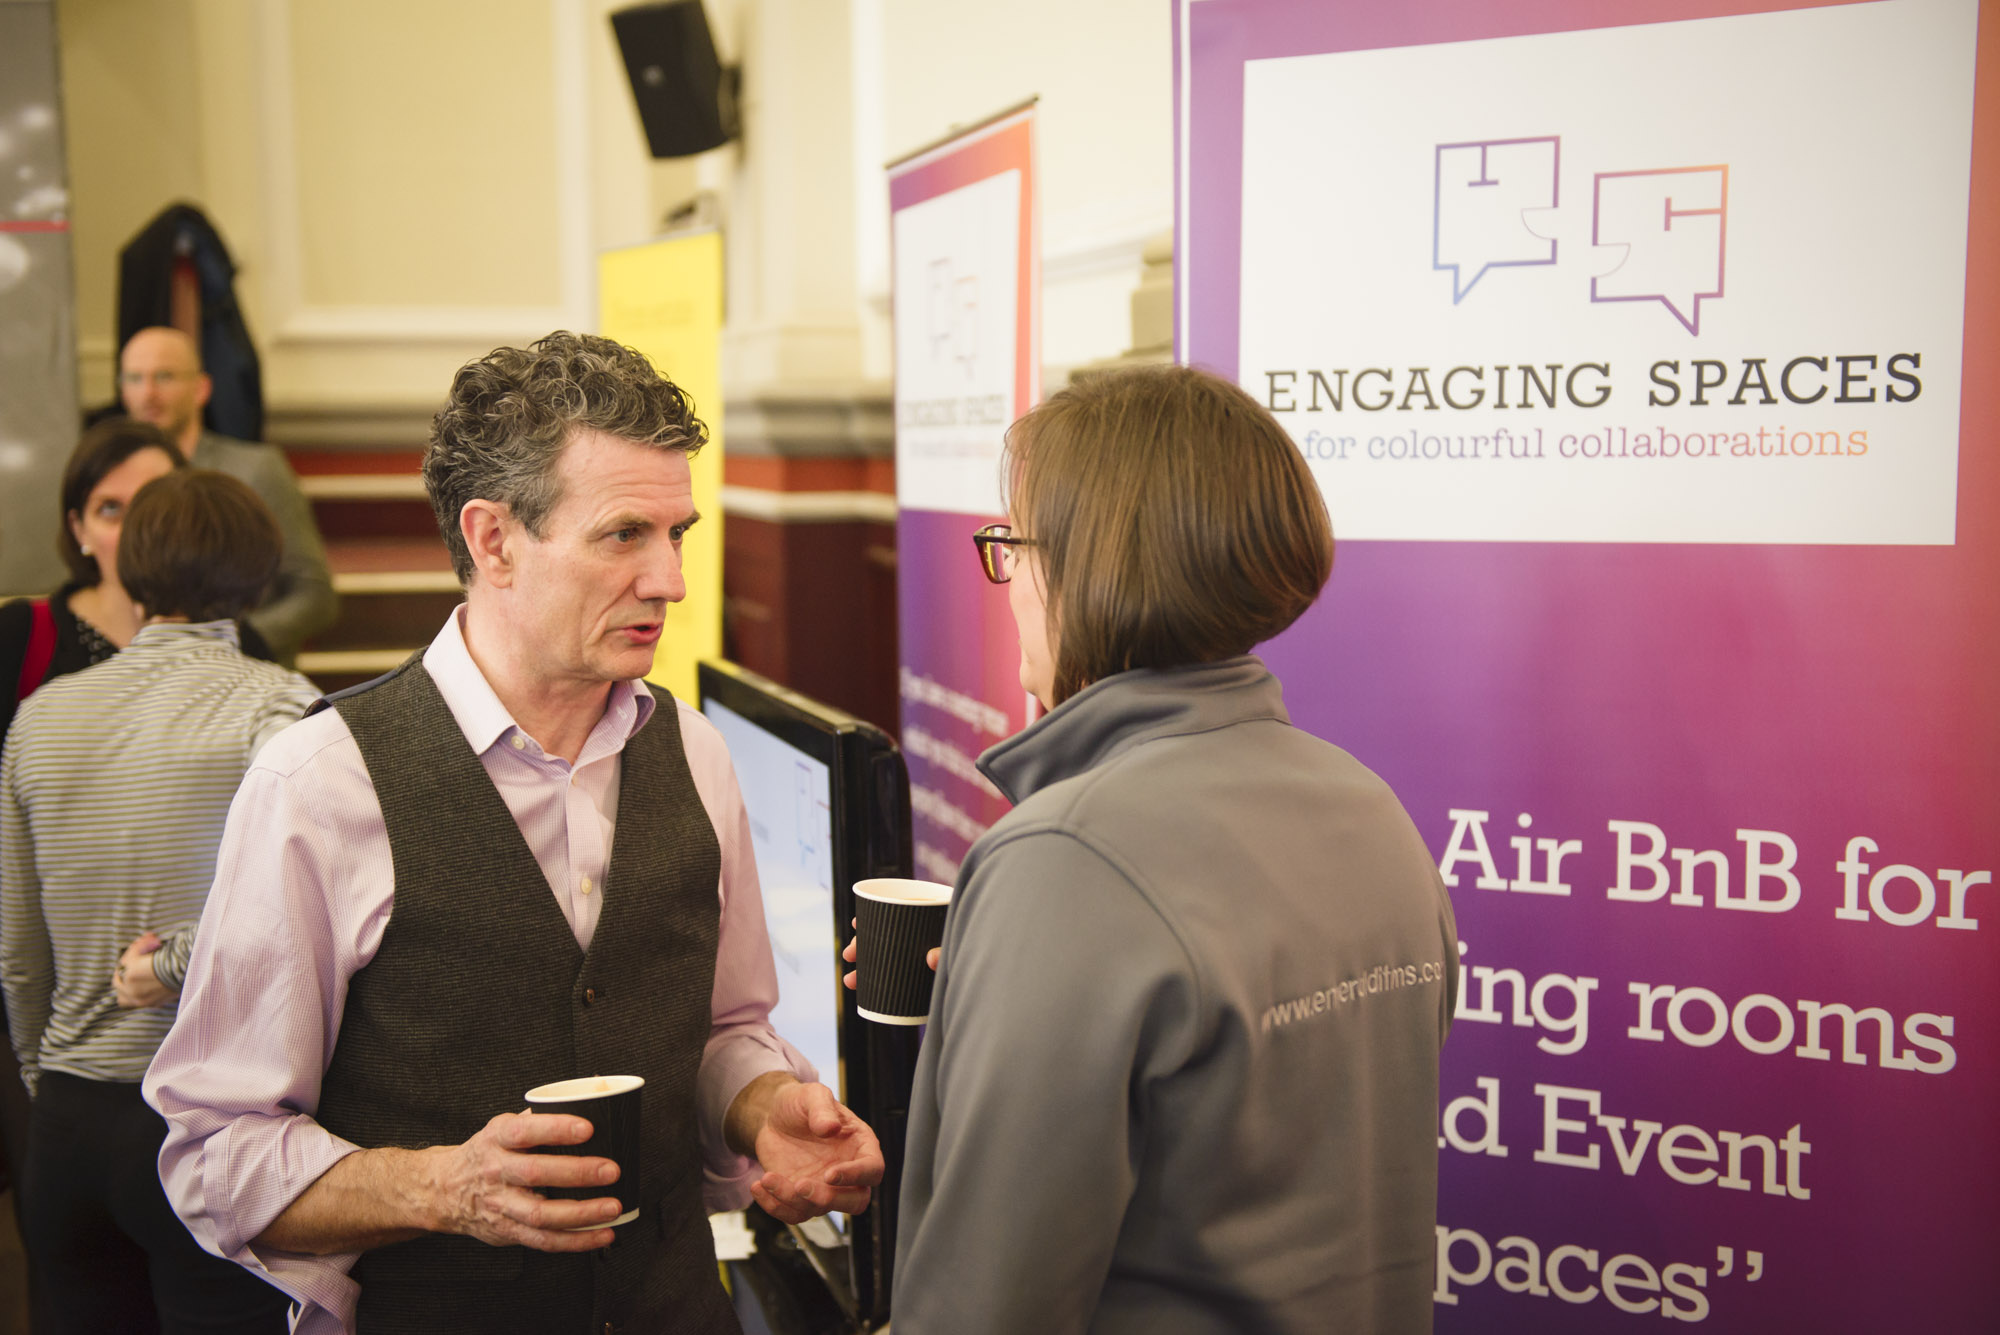 Engaging Spaces Website at the Leamington Business Show 2018